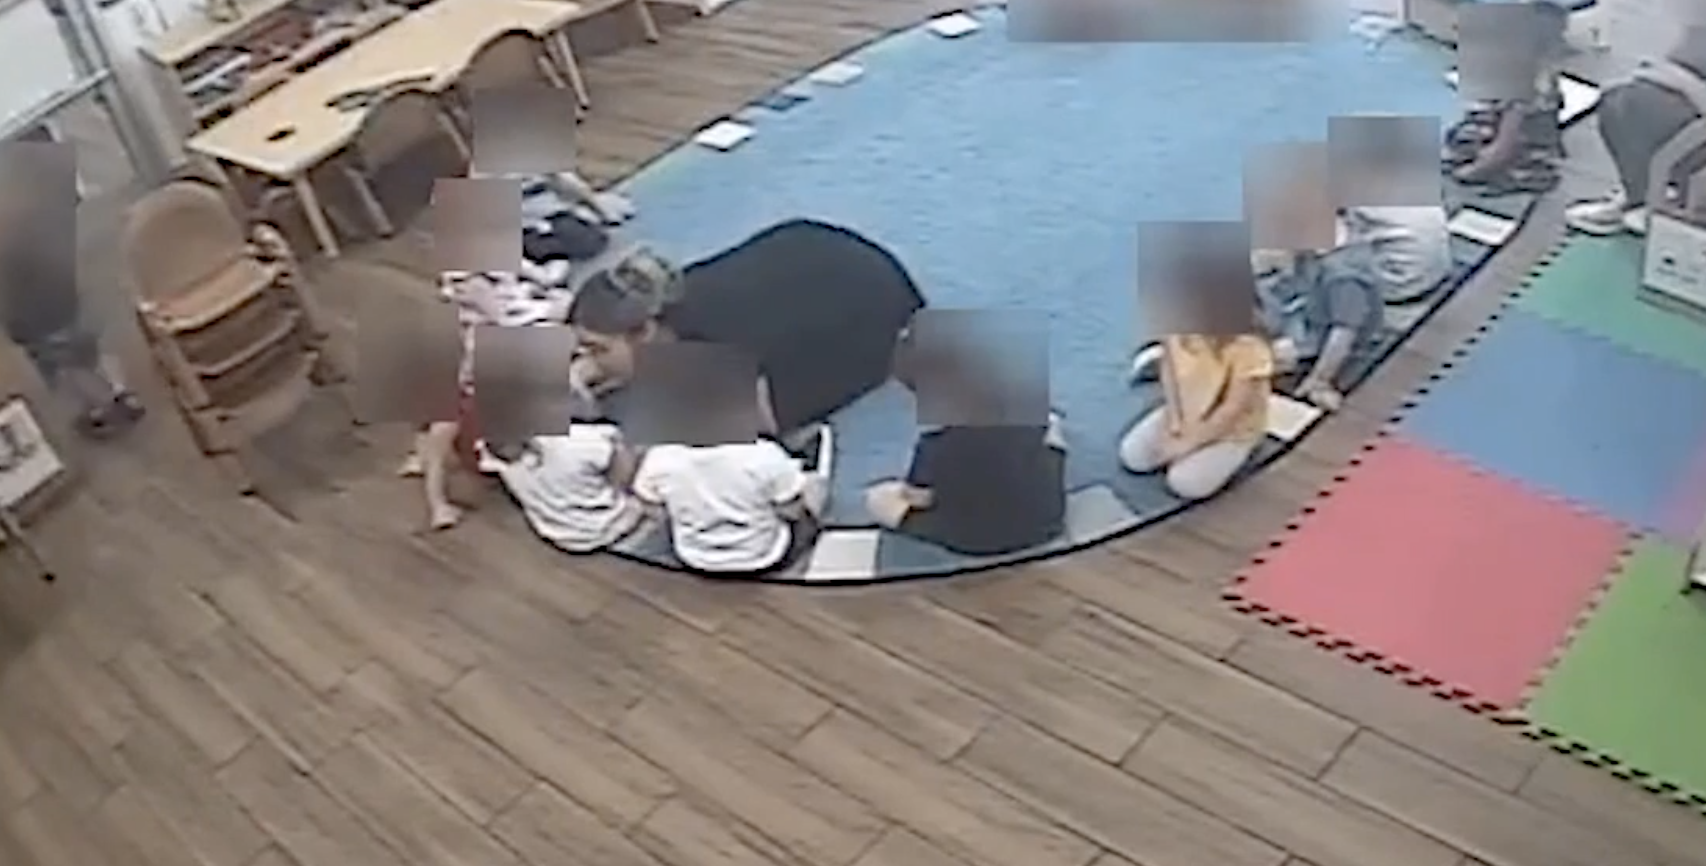 Two preschool teachers arrested after video shows alleged abuse